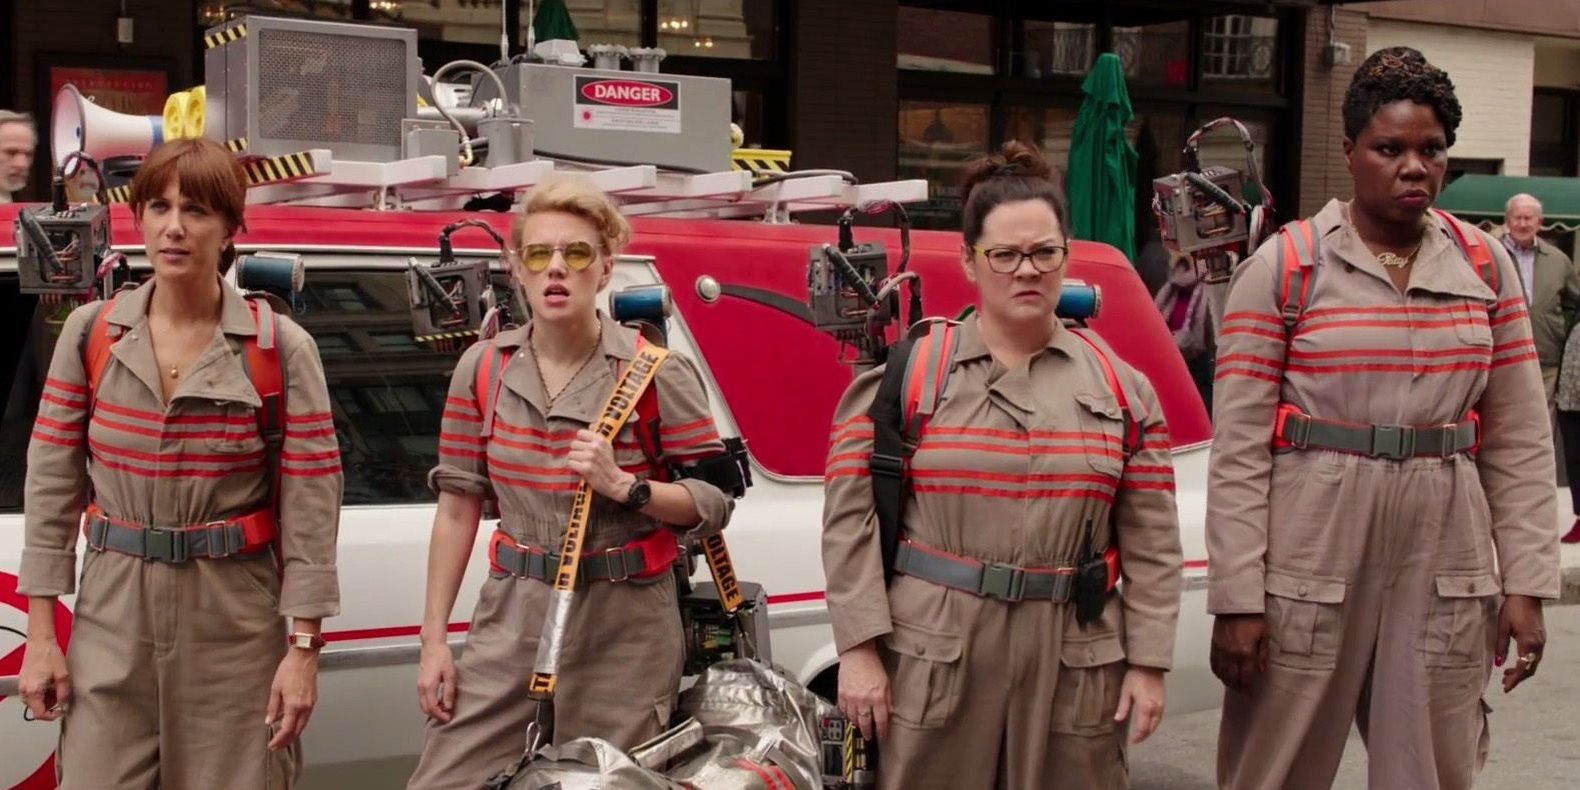 The cast of Ghostbusters 2016 by the Ectomobile